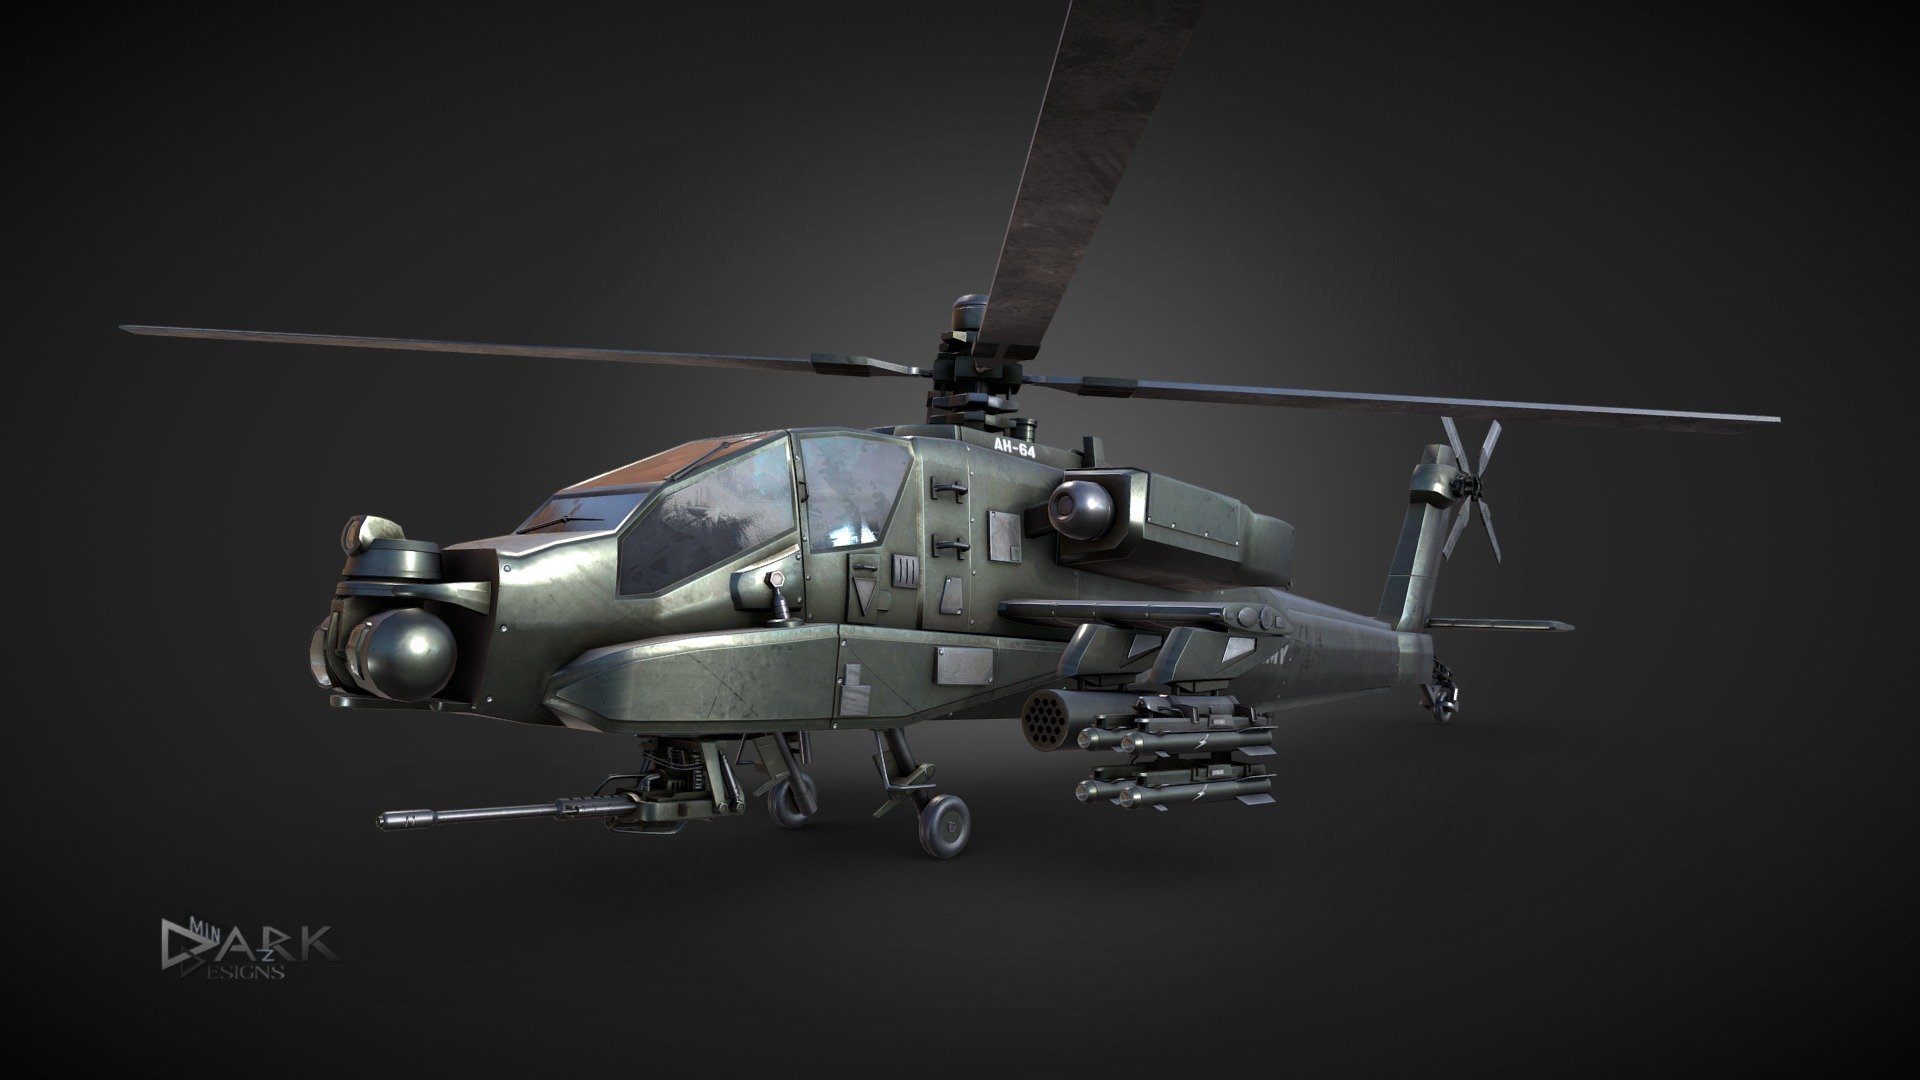 The Boeing AH-64 Apache is an American twin-turboshaft attack helicopter with a tailwheel-type landing gear arrangement and a tandem cockpit for a crew of two. It features a nose-mounted sensor suite for target acquisition and night vision systems. It is armed with a 30 mm (1.18 in) M230 chain gun carried between the main landing gear, under the aircraft's forward fuselage, and four hardpoints mounted on stub-wing pylons for carrying armament and stores, typically a mixture of AGM-114 Hellfire missiles and Hydra 70 rocket pods. The AH-64 has significant systems redundancy to improve combat survivability.

The Apache began as the Model 77 developed by Hughes Helicopters for the United States Army's Advanced Attack Helicopter program to replace the AH-1 Cobra. The prototype YAH-64 was first flown on 30 September 1975. The U.S. Army selected the YAH-64 over the Bell YAH-63 in 1976, and later approved full production in 1982 3d model